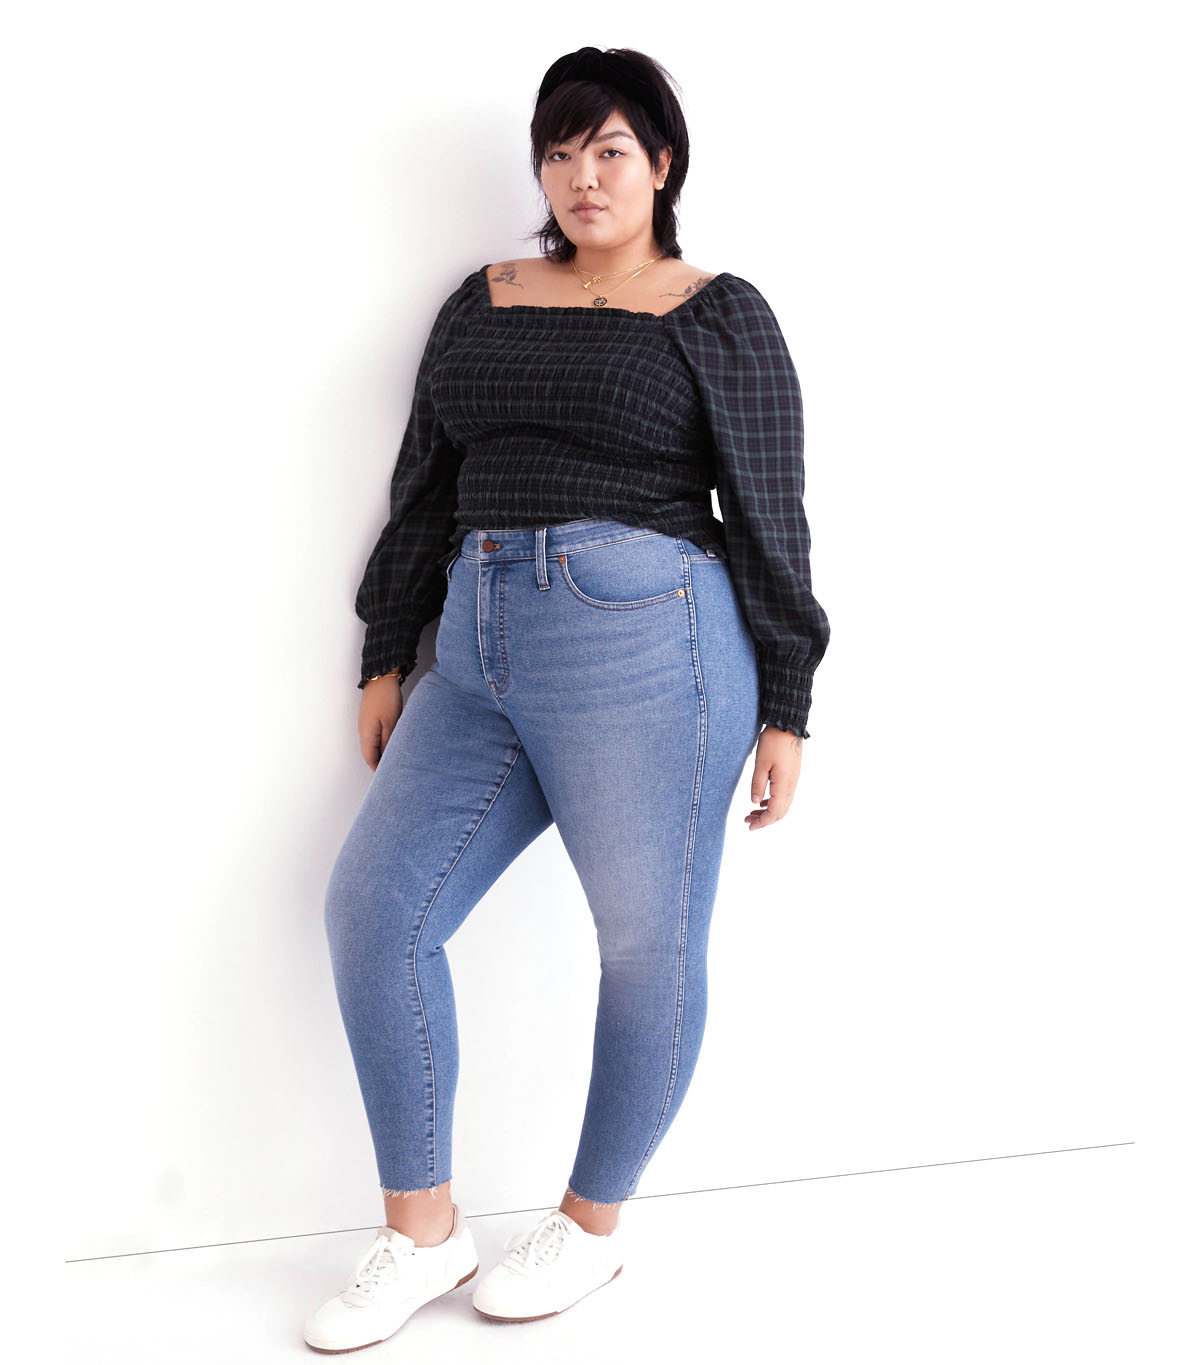 alex collier recommends Thick Women In Jeans